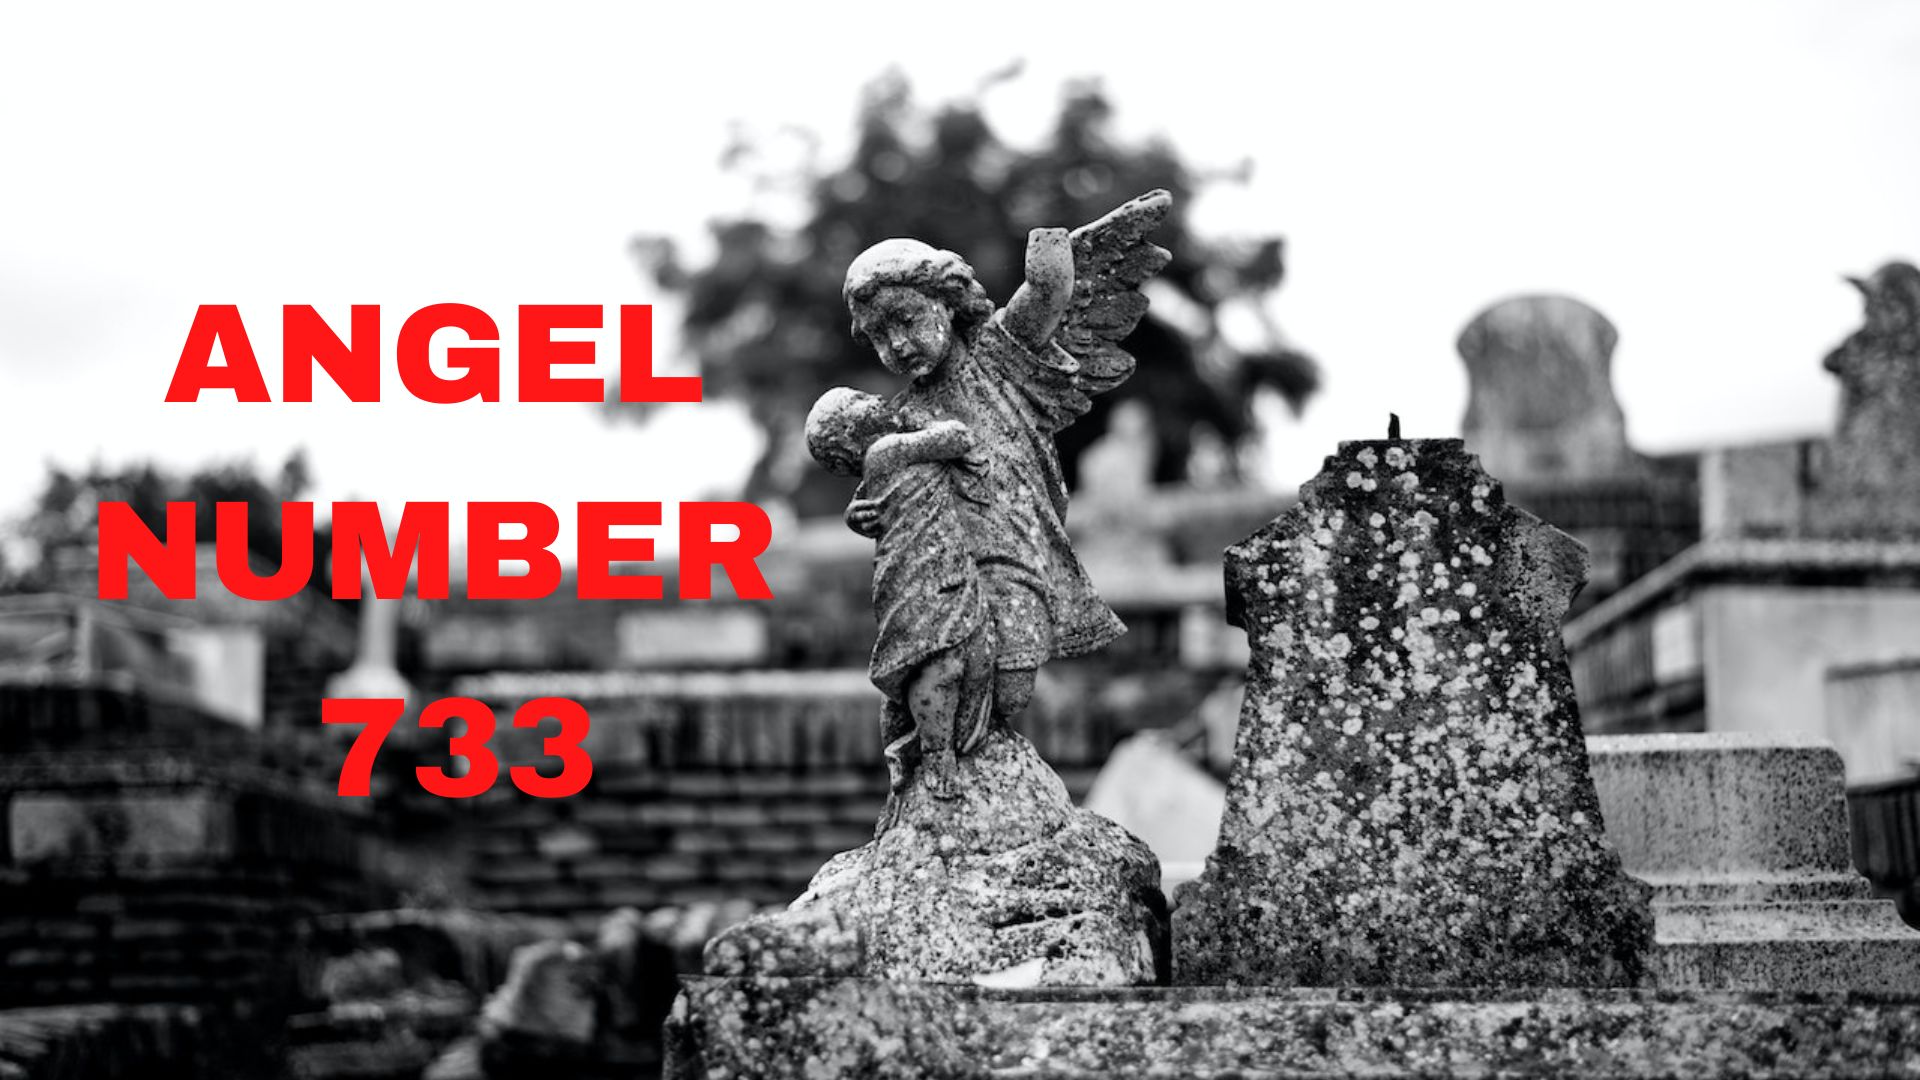 Angel Number 733 - A Symbol Of Peace